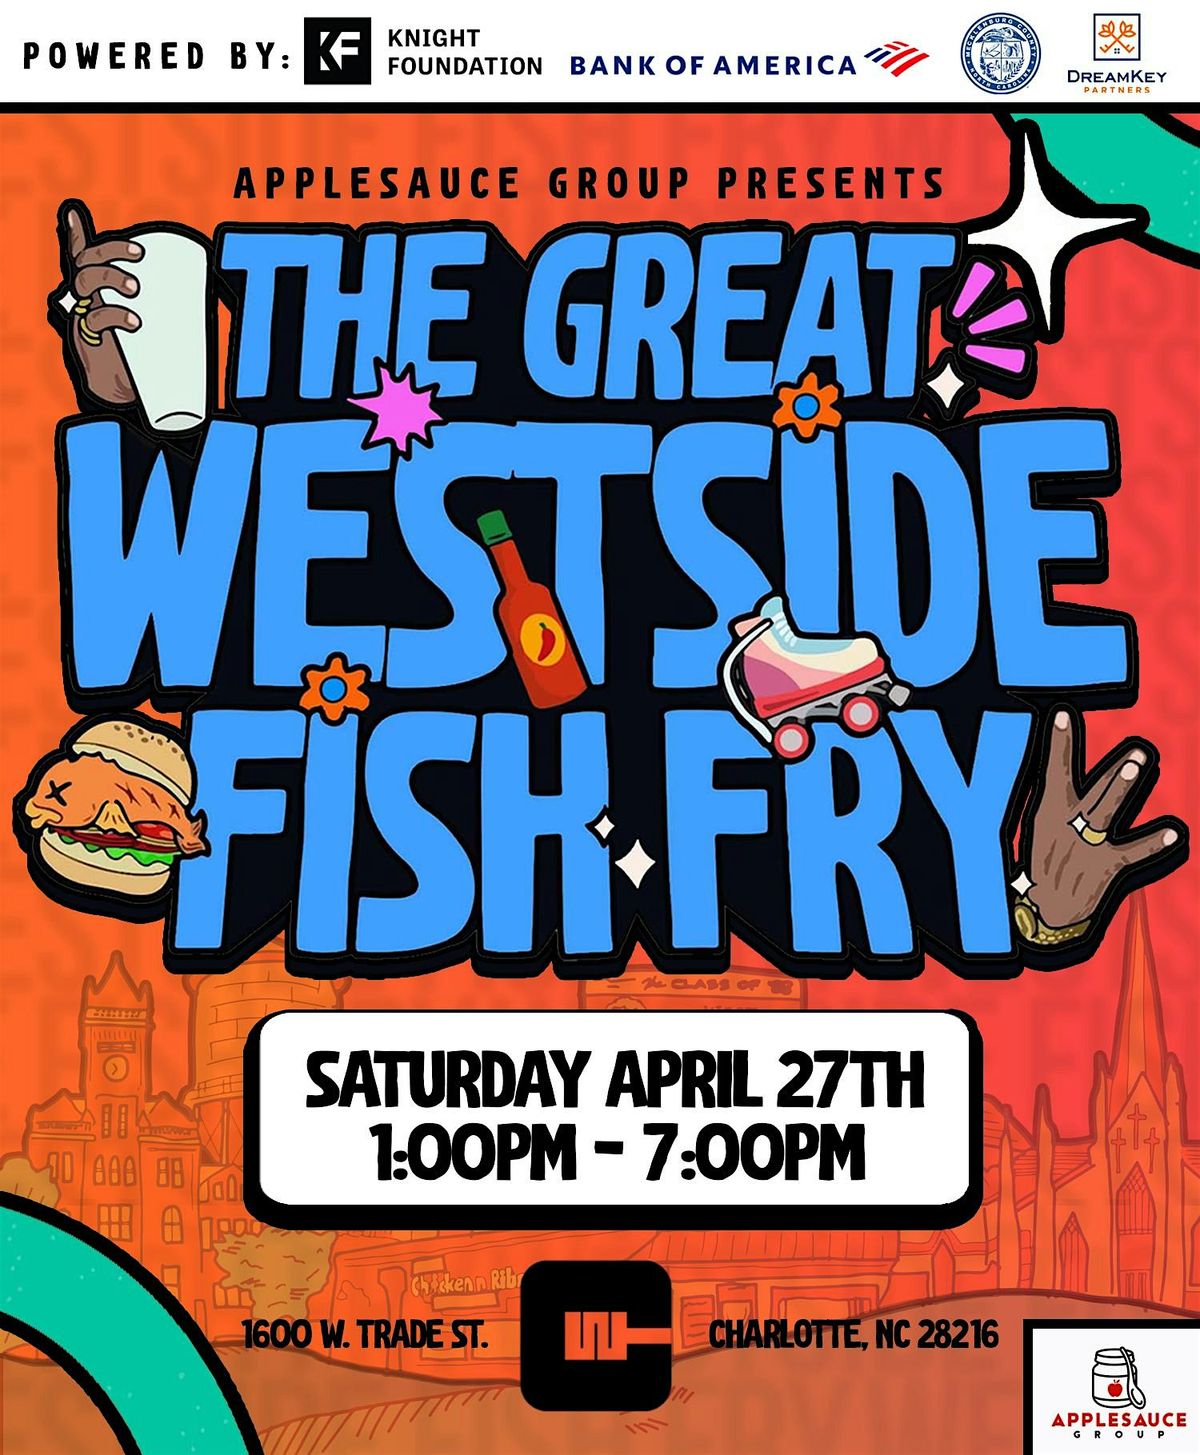 THE GREAT WESTSIDE FISH FRY